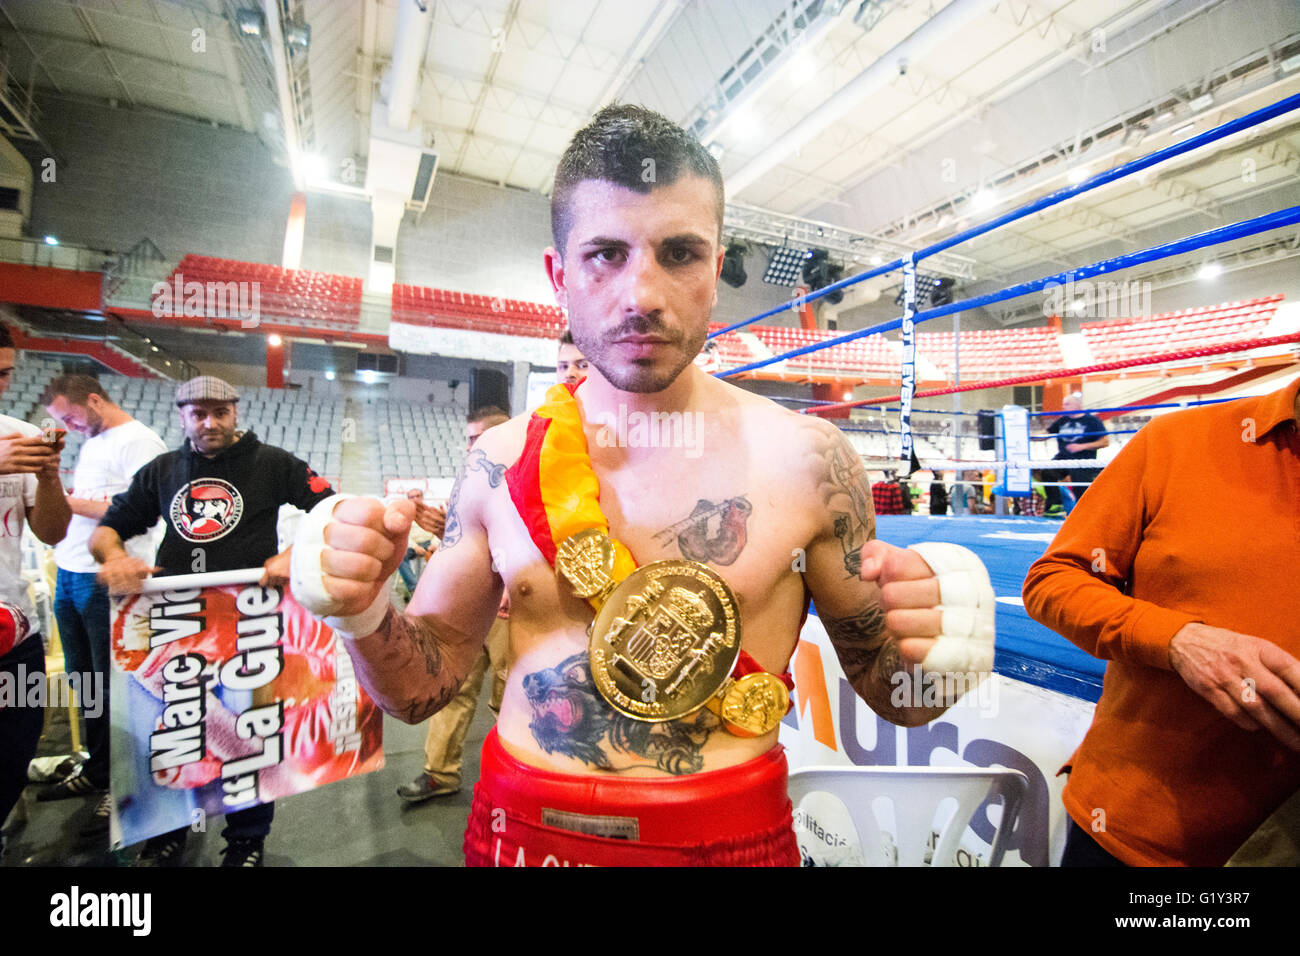 Gijon, Spain. 21st May, 2016. Marc Vidal with the belt of Spanish Champion after his victory the boxing match against Juancho Gonzalez of Spanish national featherweight boxing championships at Sports Center on May 21, 2016 in Gijon, Spain. Credit: David Gato/Alamy Live News Stock Photo